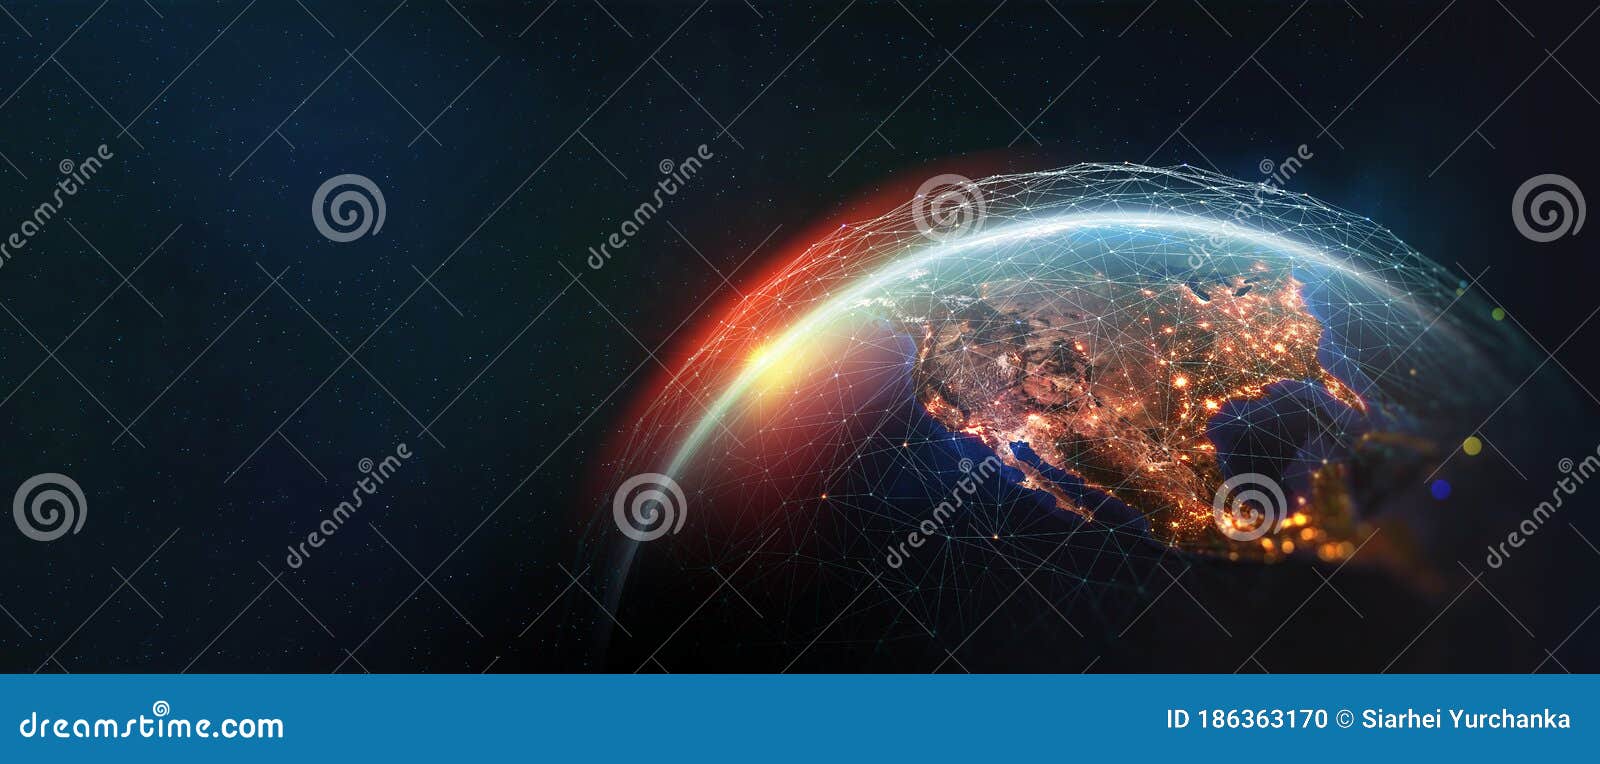 earth view from space. global network. blockchain technology. planet and communication